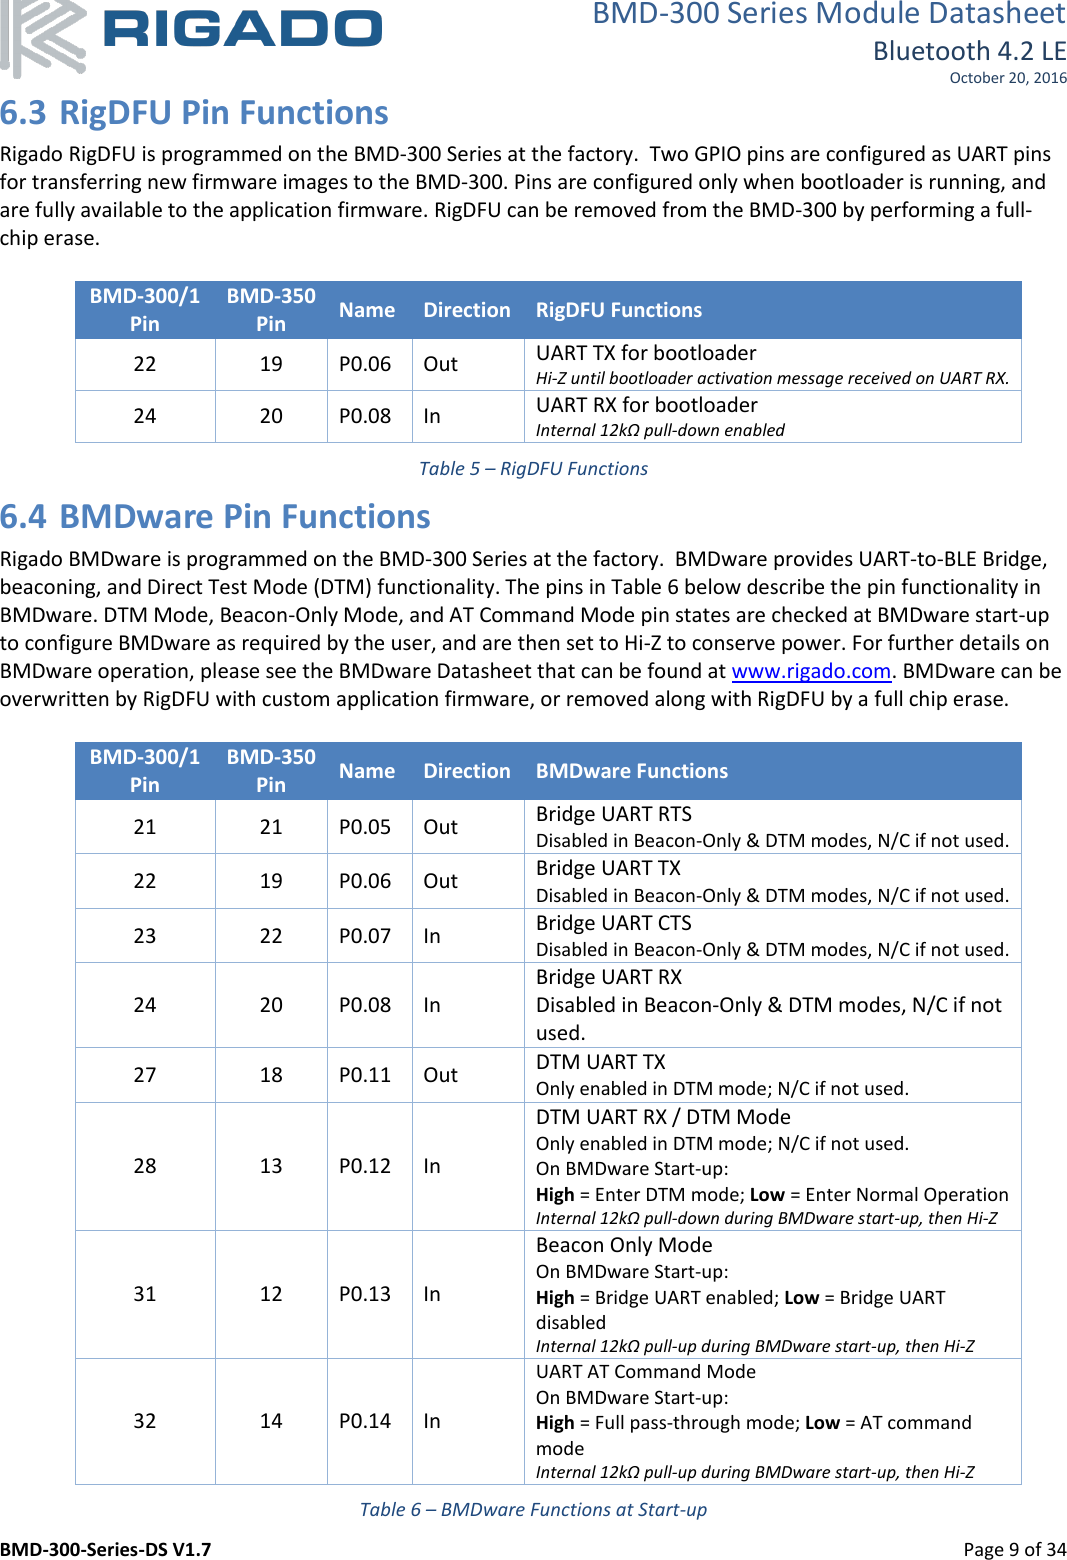 BMD-300 Series Module Datasheet Bluetooth 4.2 LE October 20, 2016 BMD-300-Series-DS V1.7         Page 9 of 34 6.3 RigDFU Pin Functions Rigado RigDFU is programmed on the BMD-300 Series at the factory.  Two GPIO pins are configured as UART pins for transferring new firmware images to the BMD-300. Pins are configured only when bootloader is running, and are fully available to the application firmware. RigDFU can be removed from the BMD-300 by performing a full-chip erase.  BMD-300/1 Pin BMD-350 Pin Name Direction RigDFU Functions  22 19 P0.06 Out UART TX for bootloader Hi-Z until bootloader activation message received on UART RX. 24 20 P0.08 In UART RX for bootloader  Internal 12kΩ pull-down enabled Table 5 – RigDFU Functions 6.4 BMDware Pin Functions Rigado BMDware is programmed on the BMD-300 Series at the factory.  BMDware provides UART-to-BLE Bridge, beaconing, and Direct Test Mode (DTM) functionality. The pins in Table 6 below describe the pin functionality in BMDware. DTM Mode, Beacon-Only Mode, and AT Command Mode pin states are checked at BMDware start-up to configure BMDware as required by the user, and are then set to Hi-Z to conserve power. For further details on BMDware operation, please see the BMDware Datasheet that can be found at www.rigado.com. BMDware can be overwritten by RigDFU with custom application firmware, or removed along with RigDFU by a full chip erase.  BMD-300/1 Pin BMD-350 Pin Name Direction BMDware Functions 21 21 P0.05 Out Bridge UART RTS Disabled in Beacon-Only &amp; DTM modes, N/C if not used. 22 19 P0.06 Out Bridge UART TX  Disabled in Beacon-Only &amp; DTM modes, N/C if not used. 23 22 P0.07 In Bridge UART CTS  Disabled in Beacon-Only &amp; DTM modes, N/C if not used. 24 20 P0.08 In Bridge UART RX  Disabled in Beacon-Only &amp; DTM modes, N/C if not used. 27 18 P0.11 Out DTM UART TX Only enabled in DTM mode; N/C if not used. 28 13 P0.12 In DTM UART RX / DTM Mode Only enabled in DTM mode; N/C if not used. On BMDware Start-up:  High = Enter DTM mode; Low = Enter Normal Operation Internal 12kΩ pull-down during BMDware start-up, then Hi-Z 31 12 P0.13 In Beacon Only Mode  On BMDware Start-up:  High = Bridge UART enabled; Low = Bridge UART disabled Internal 12kΩ pull-up during BMDware start-up, then Hi-Z 32 14 P0.14 In UART AT Command Mode On BMDware Start-up:  High = Full pass-through mode; Low = AT command mode Internal 12kΩ pull-up during BMDware start-up, then Hi-Z Table 6 – BMDware Functions at Start-up 